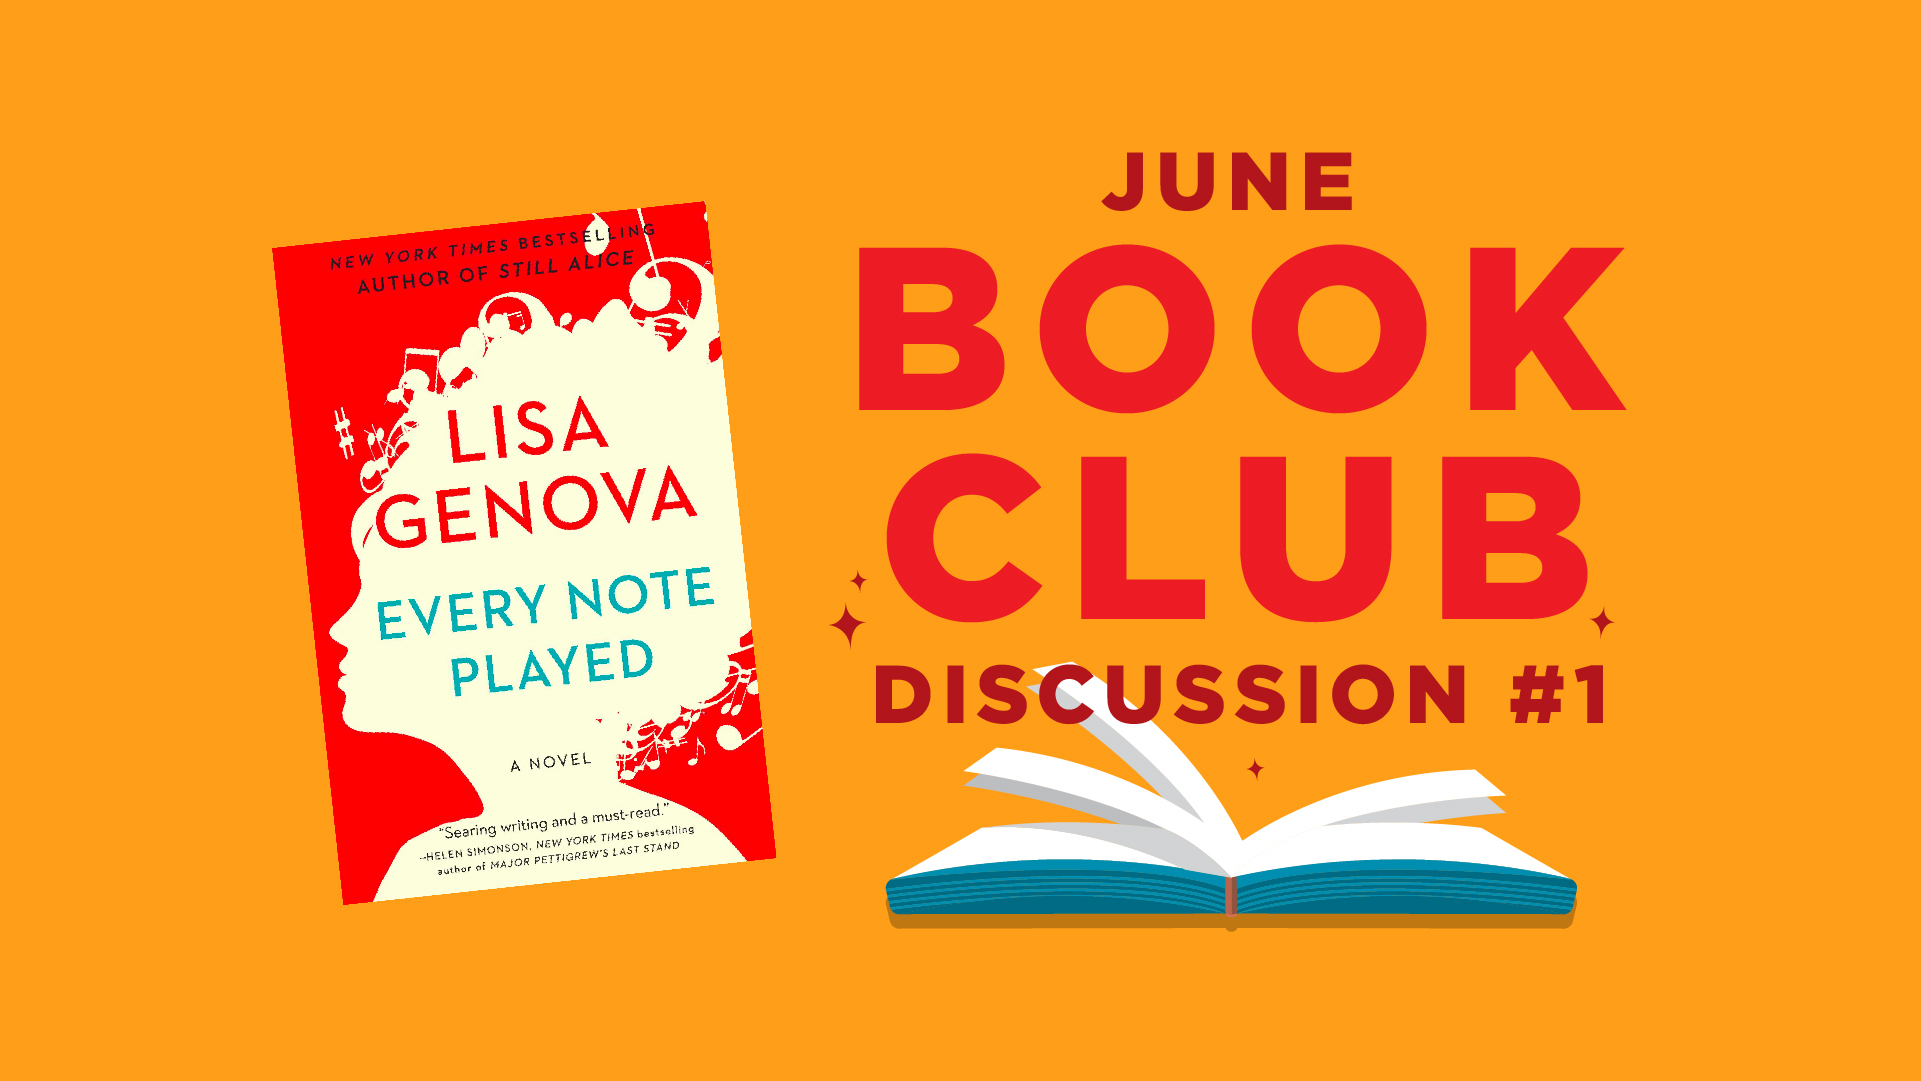 June Book Club Discussion #1 - Every Note Played by Lisa Genova